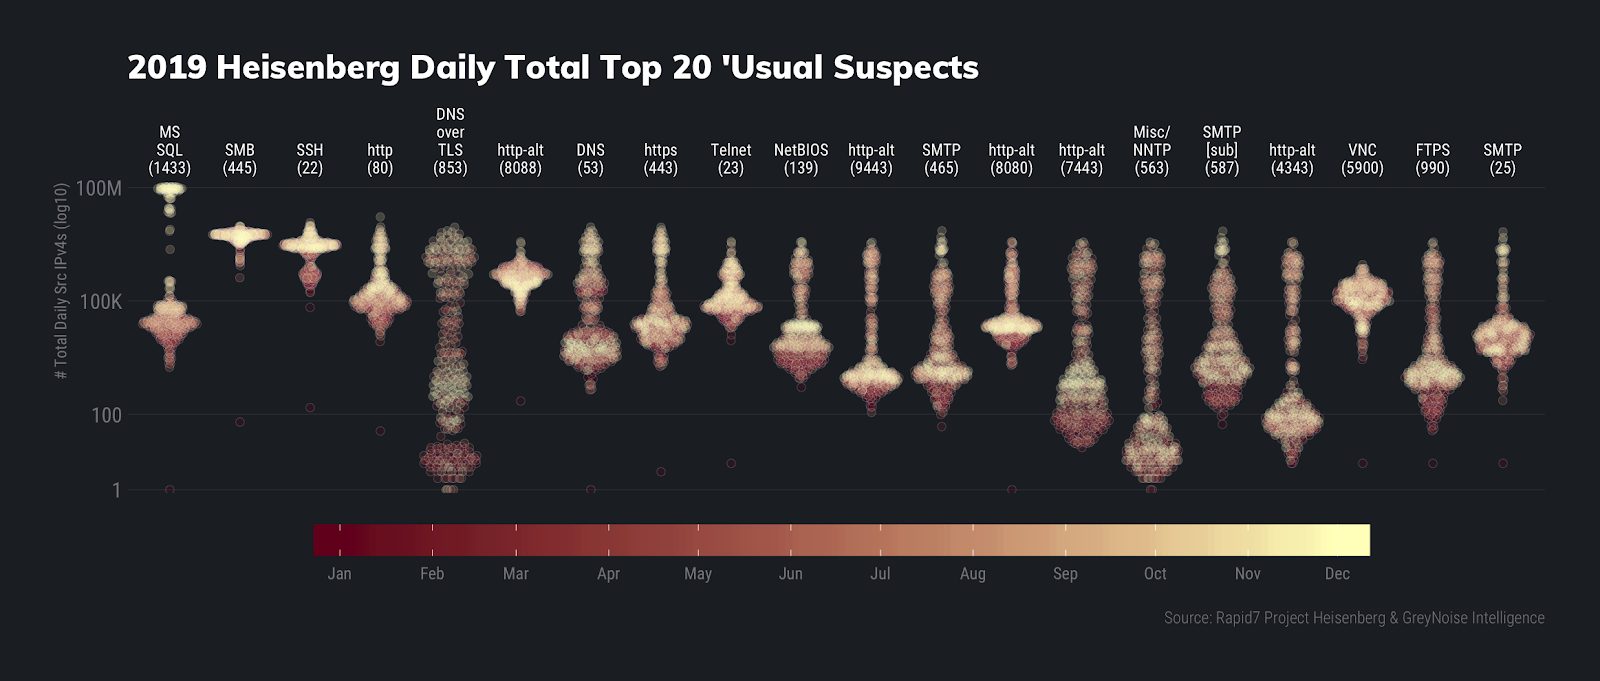 2019-heisenberg-daily-total-top-20-usual-suspects